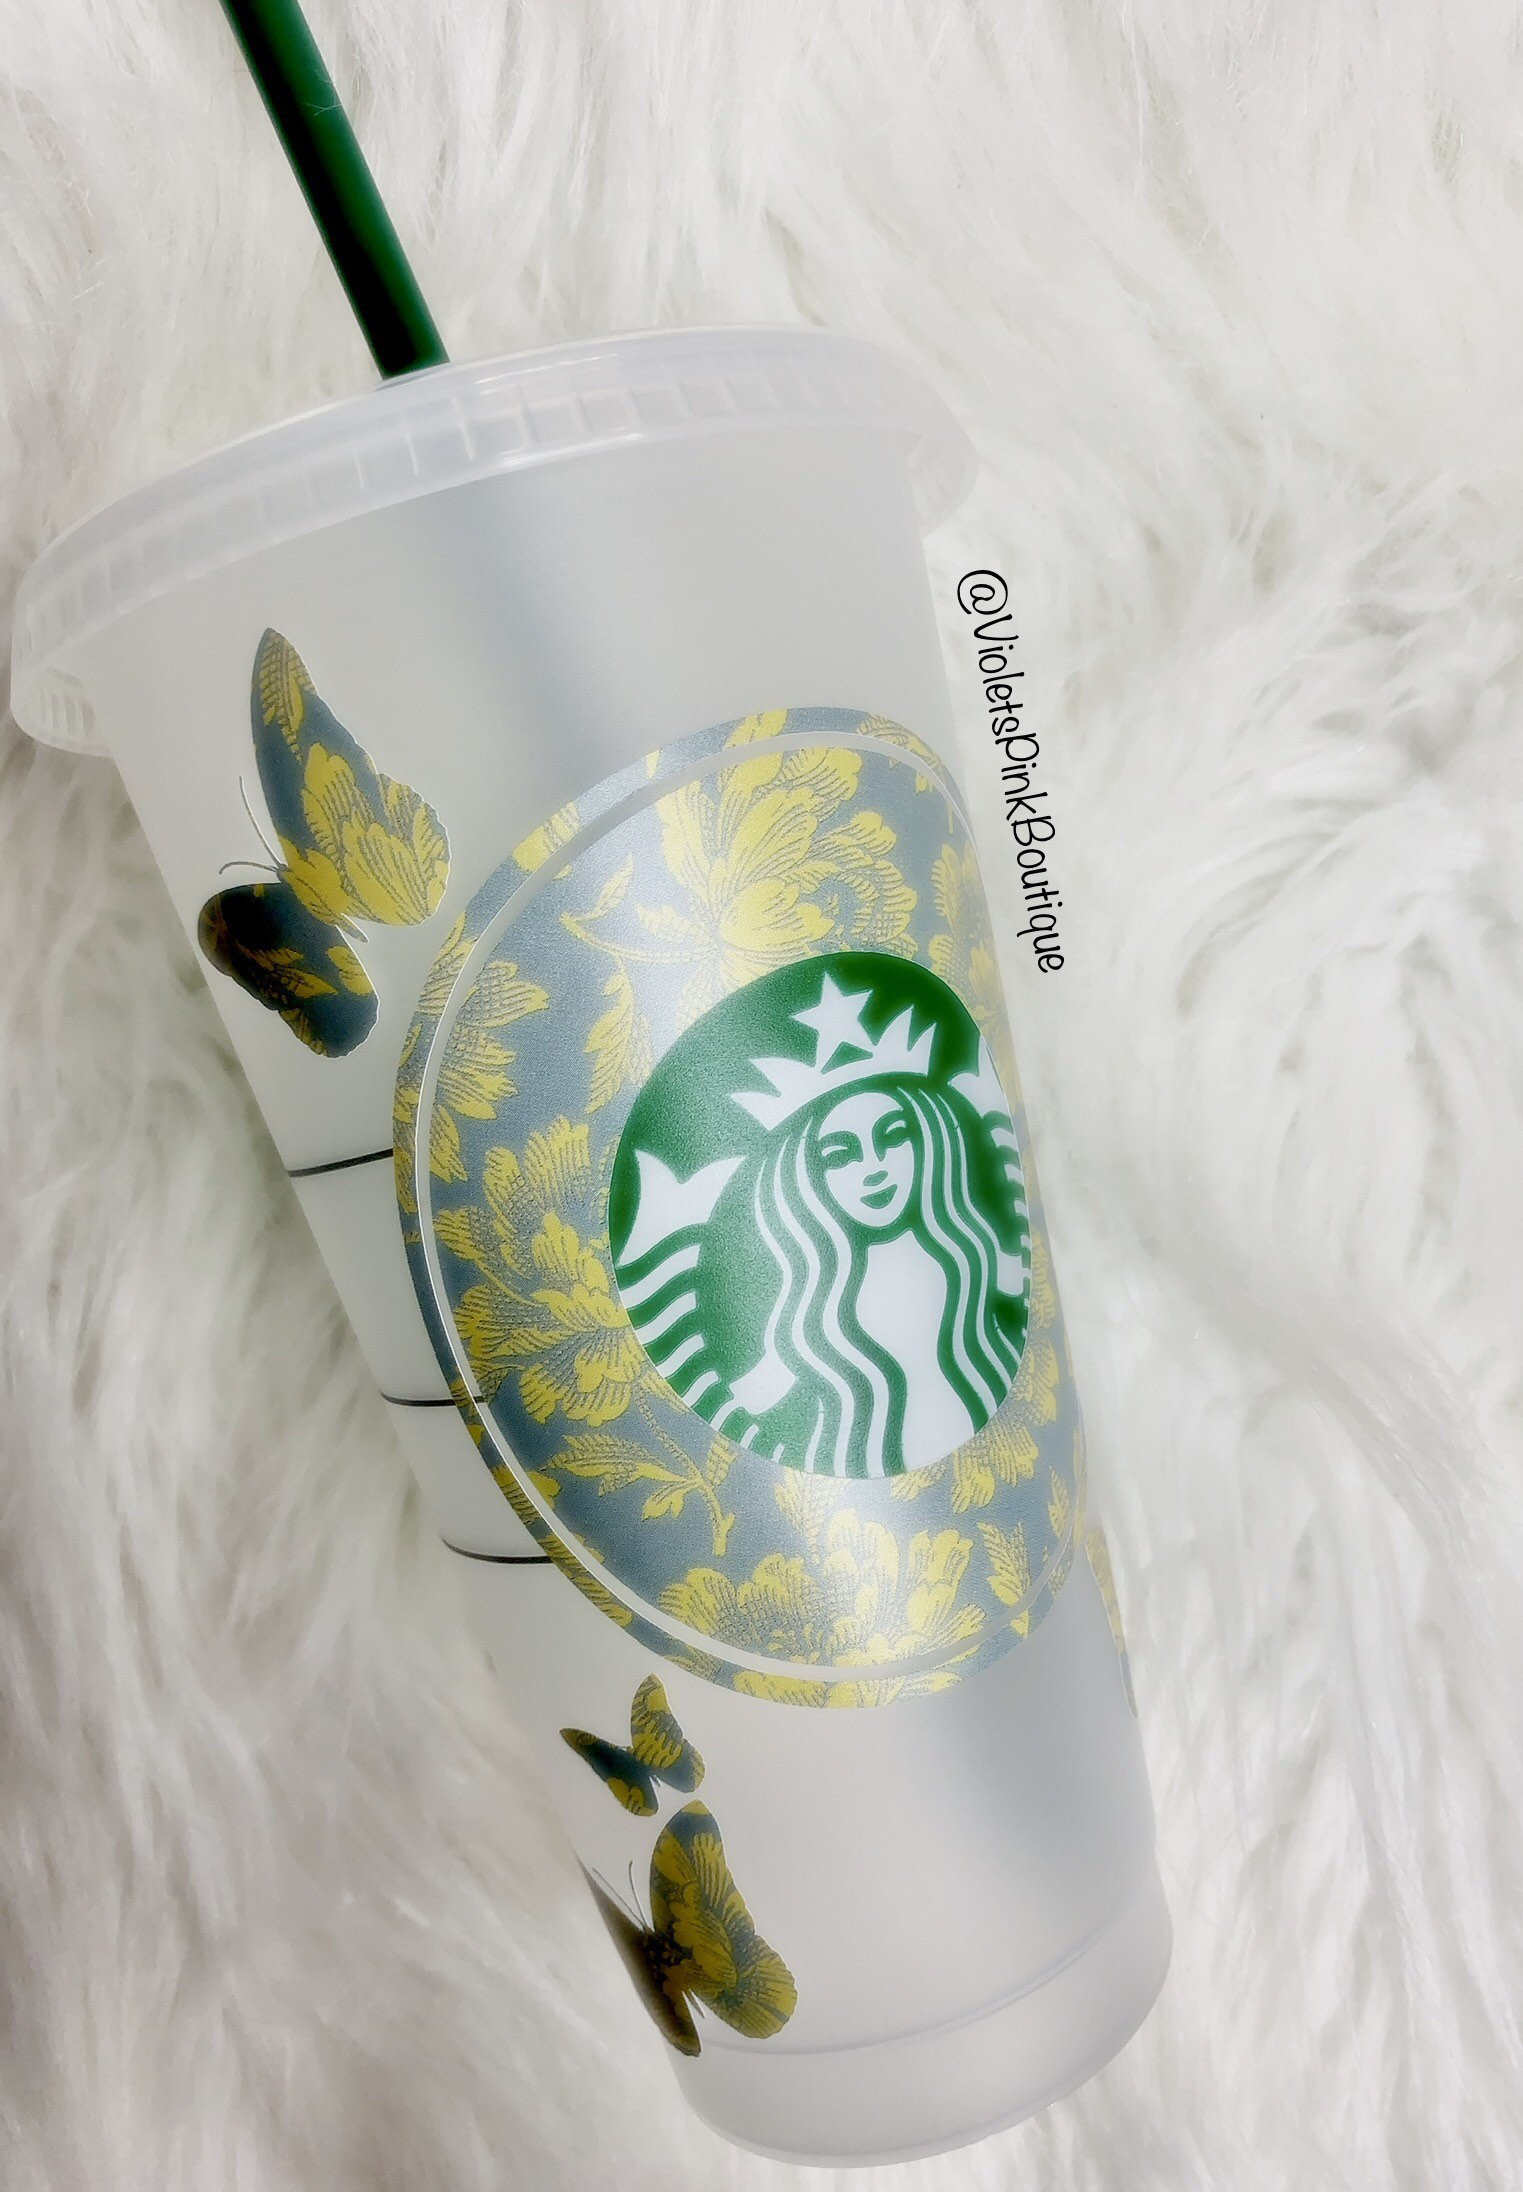 Butterfly Floral Print STARBUCKS reusable Cold Cup Custom